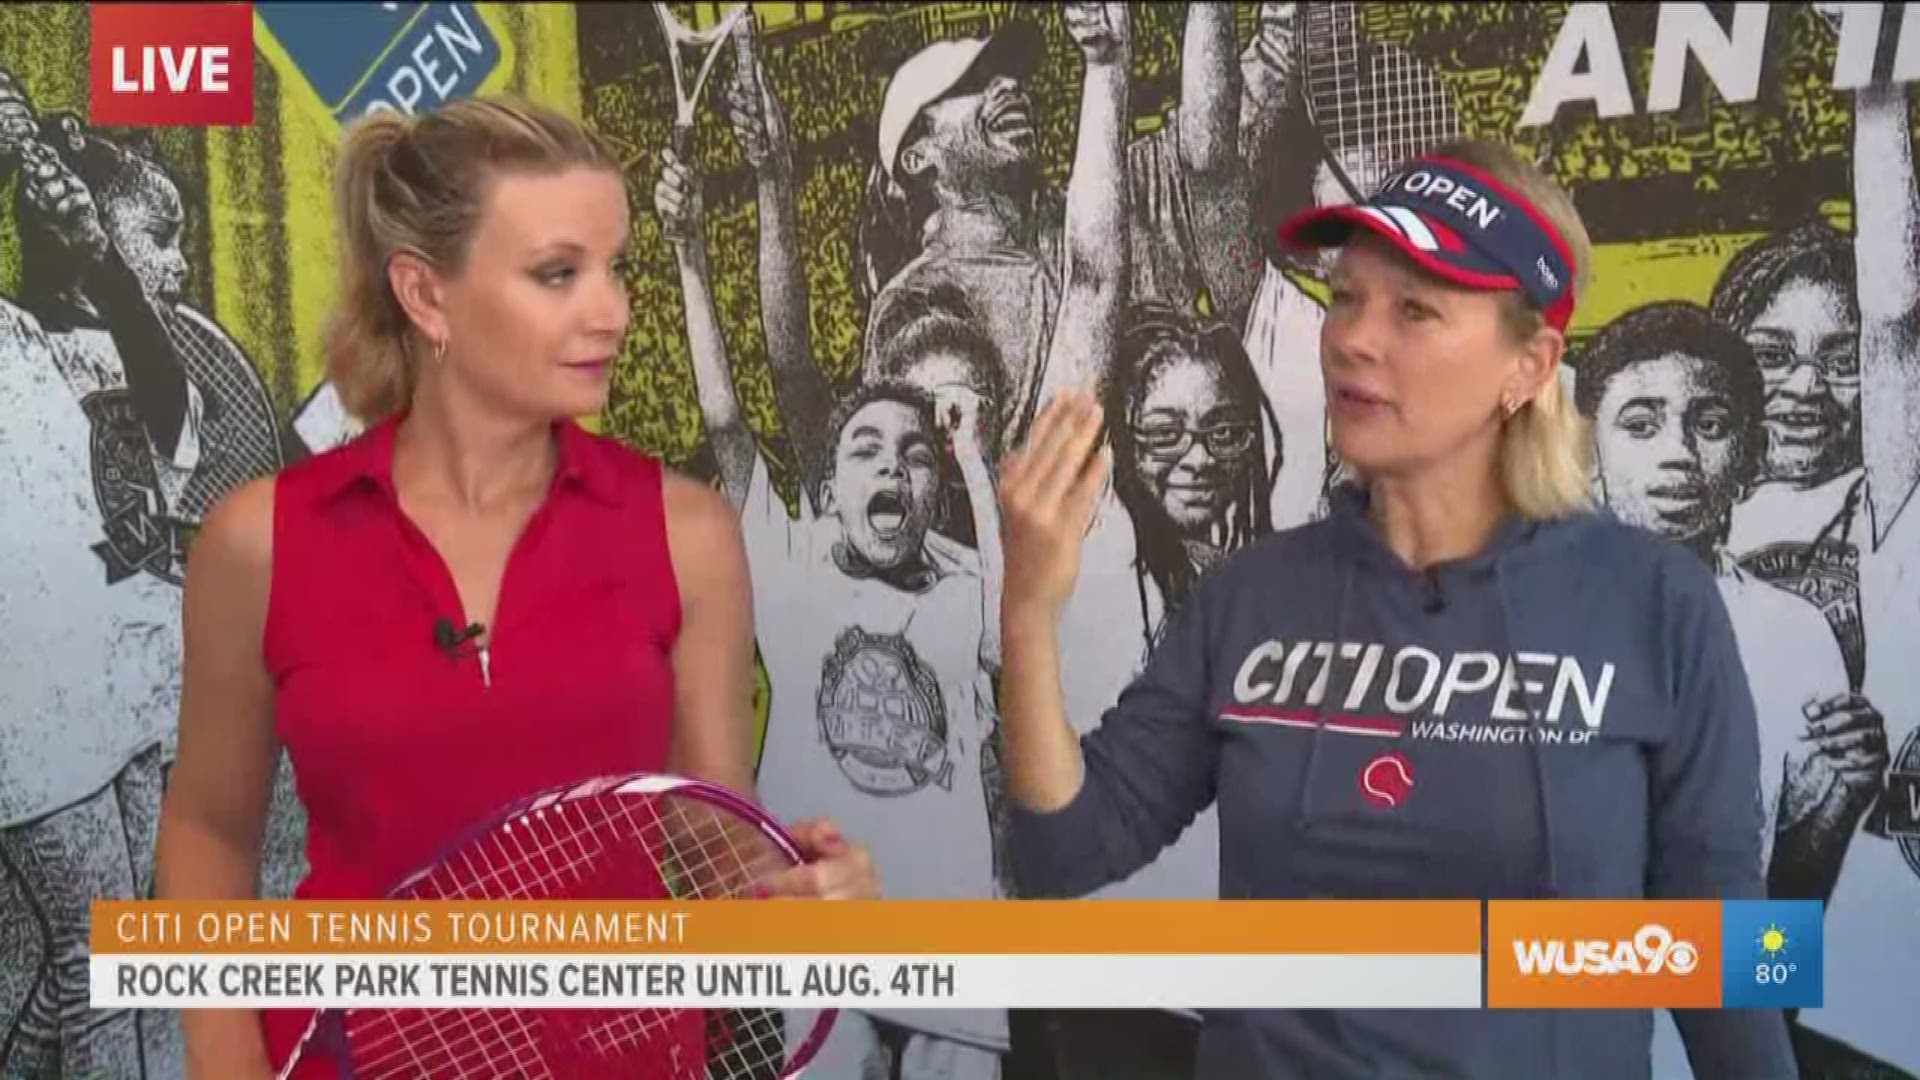 Kristen learns how the visitors to the Citi Open Tennis Tournament can help raise money for local youth programs in DC's Ward 7.